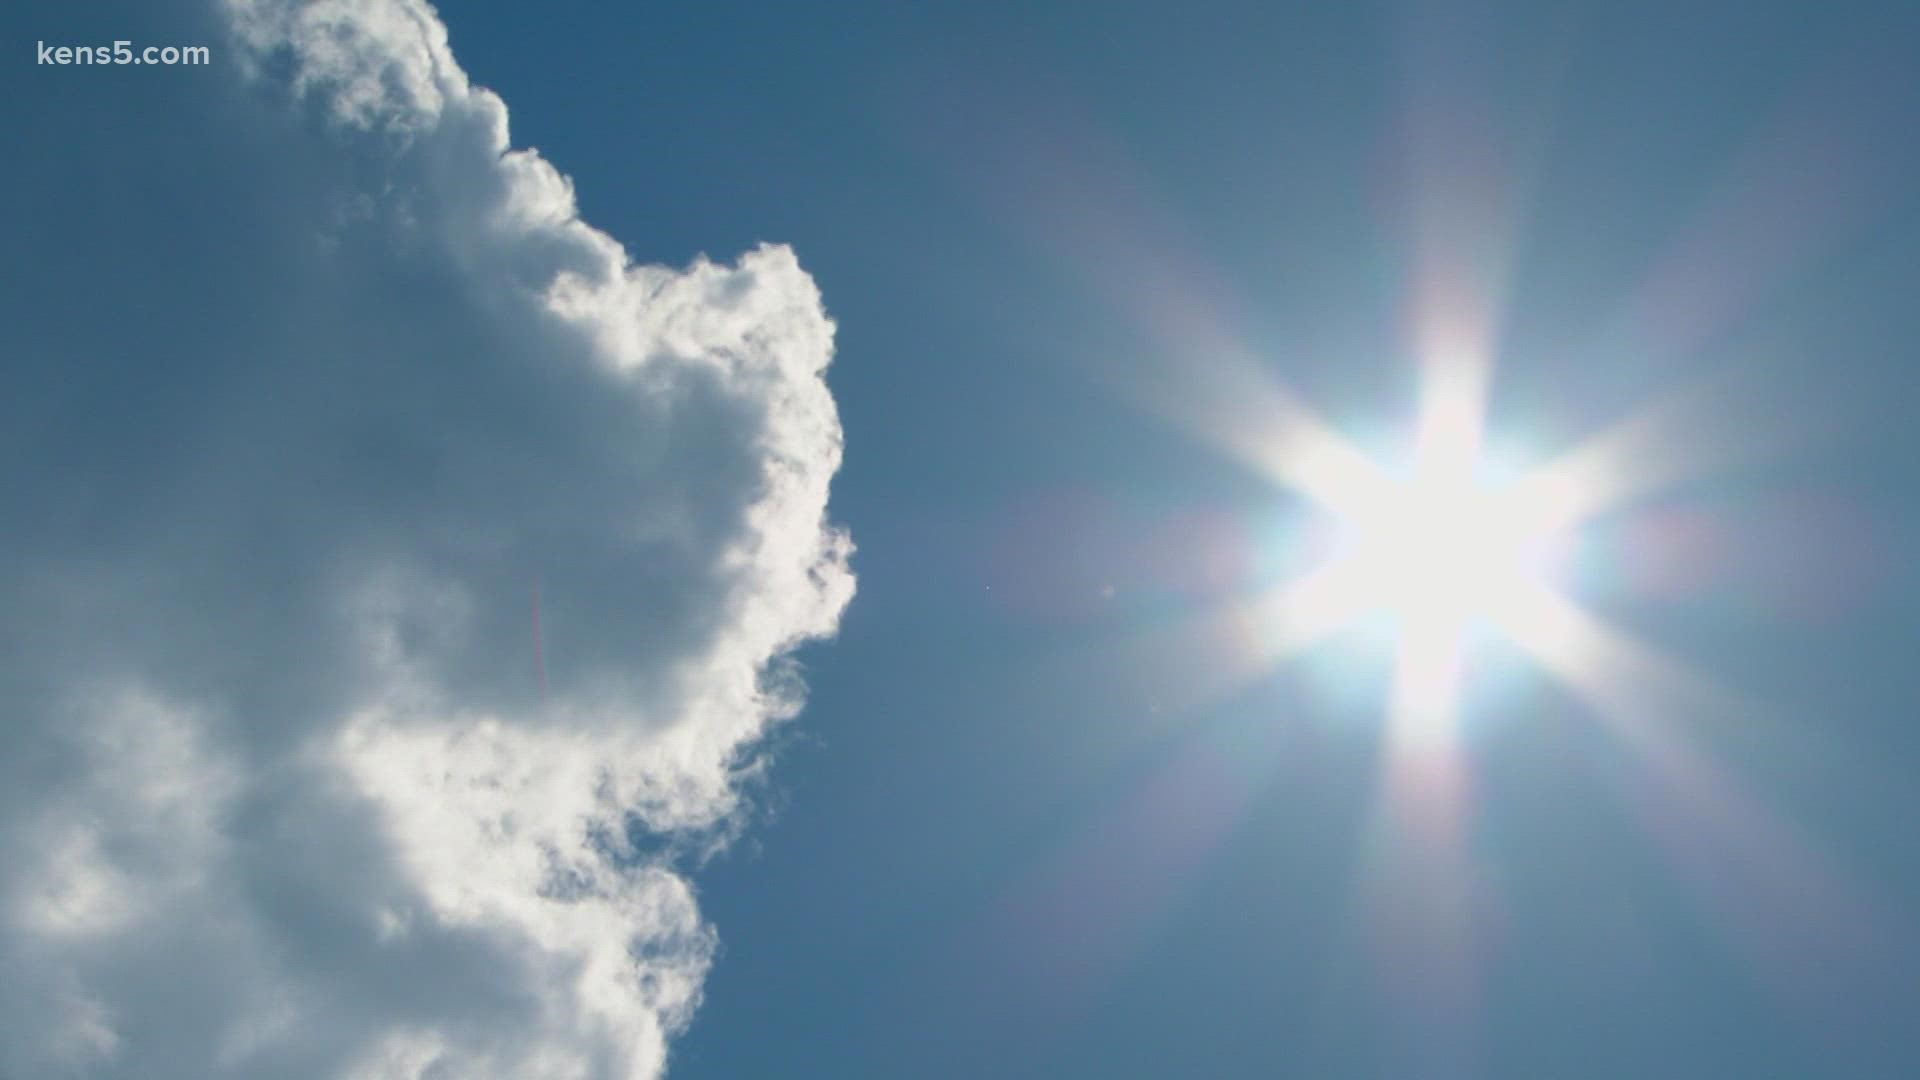 Hot temperatures for long periods of time will test the Texas power grid.